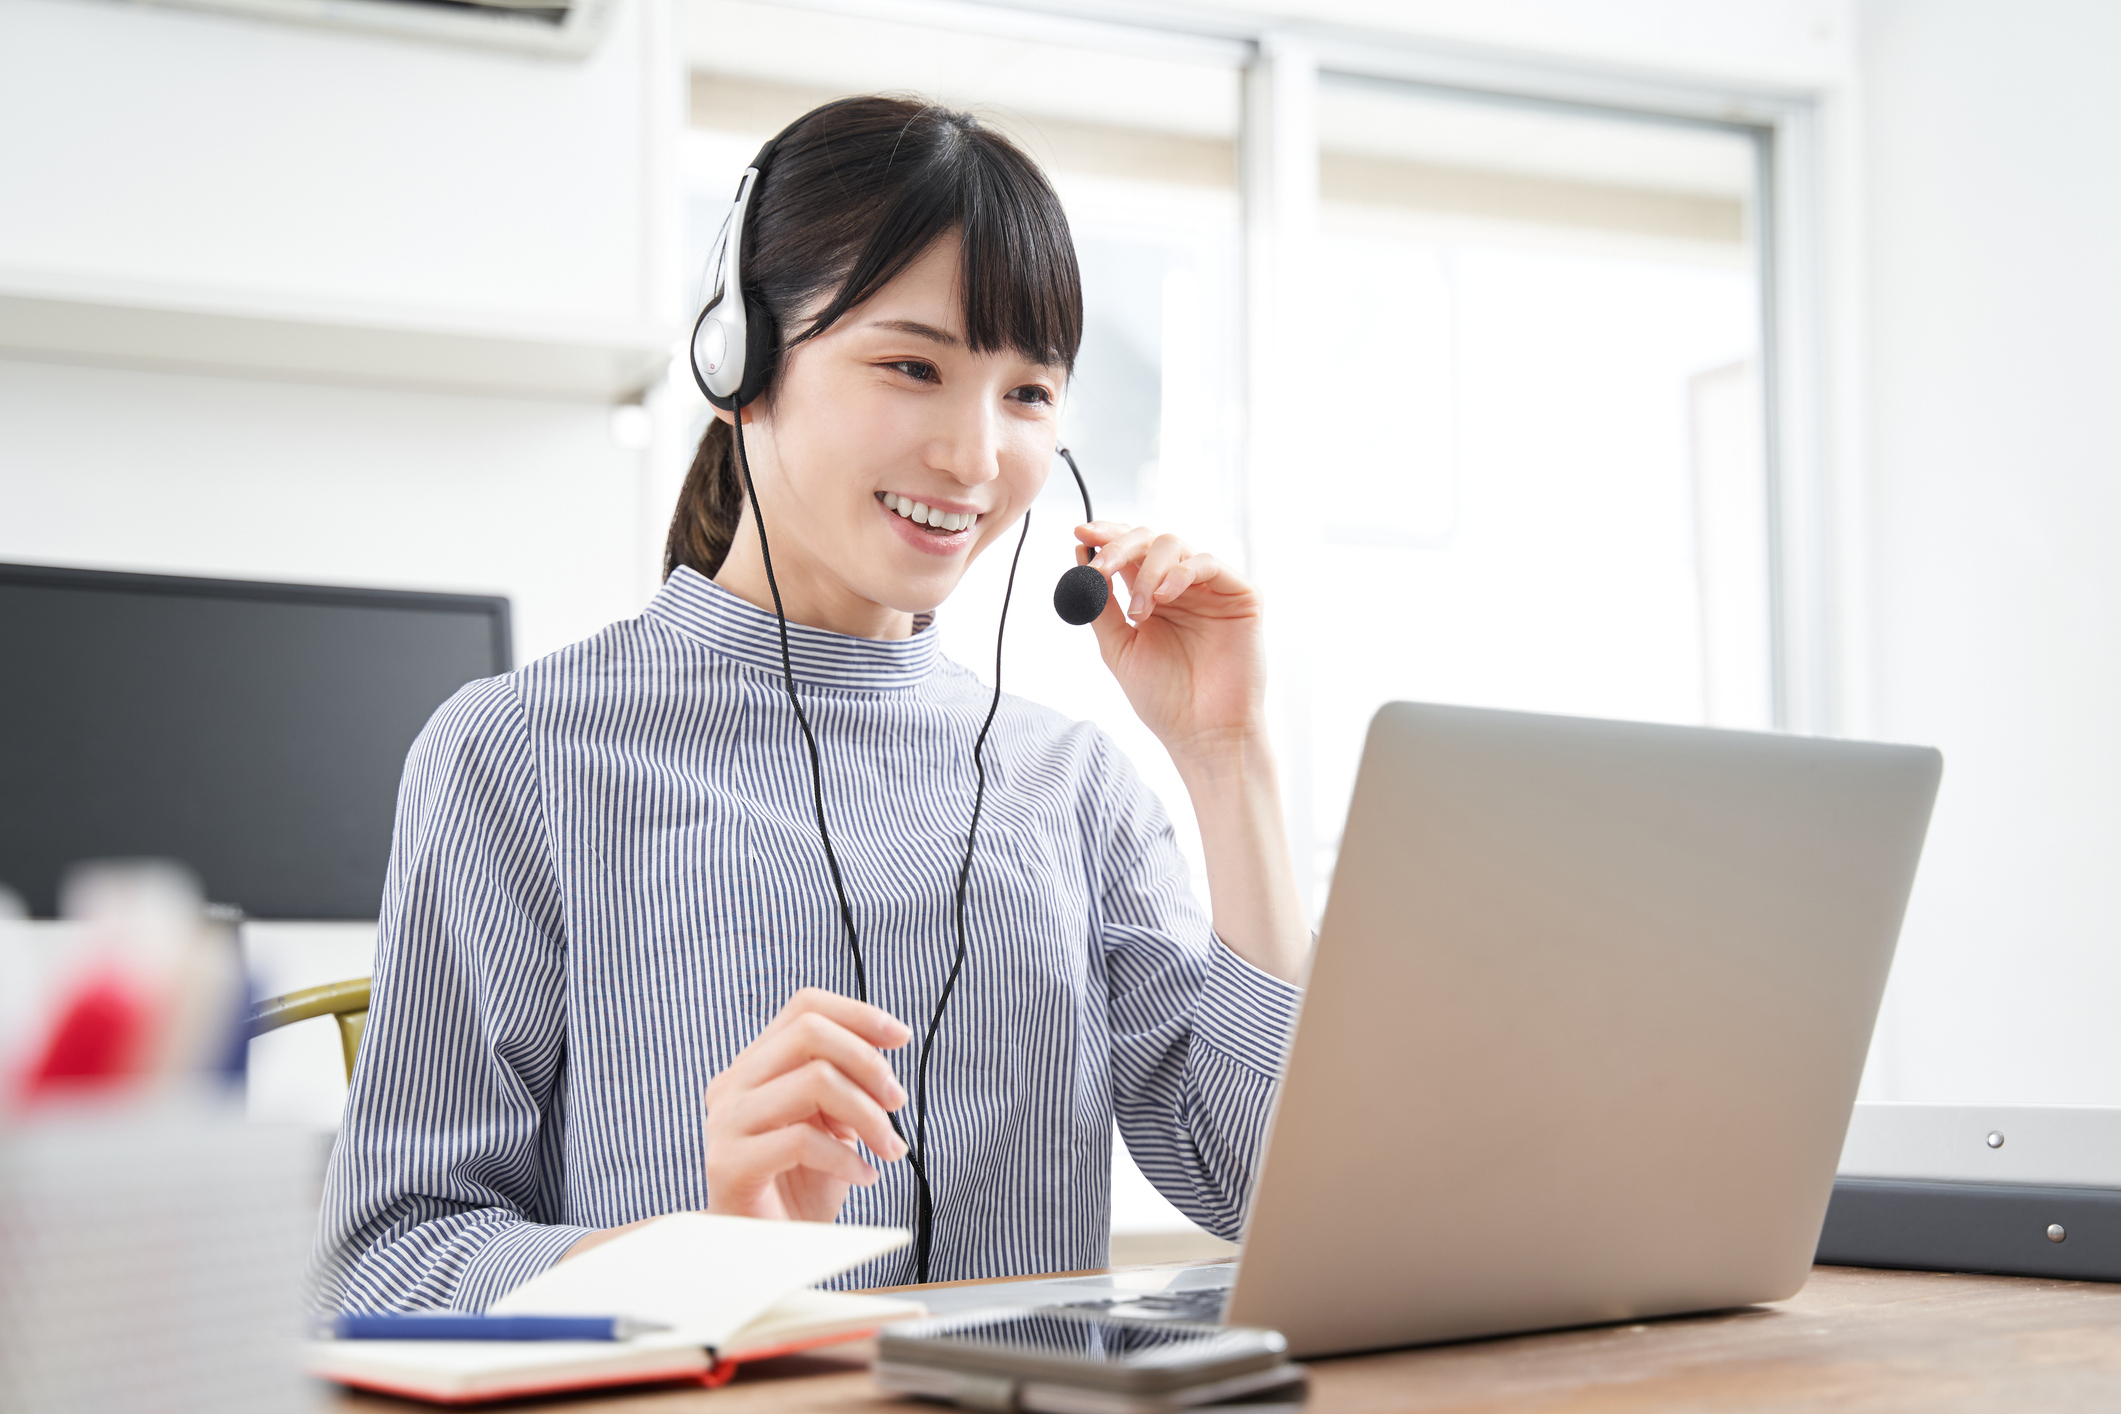 A plainclothes Japanese businesswoman in an online meeting at home